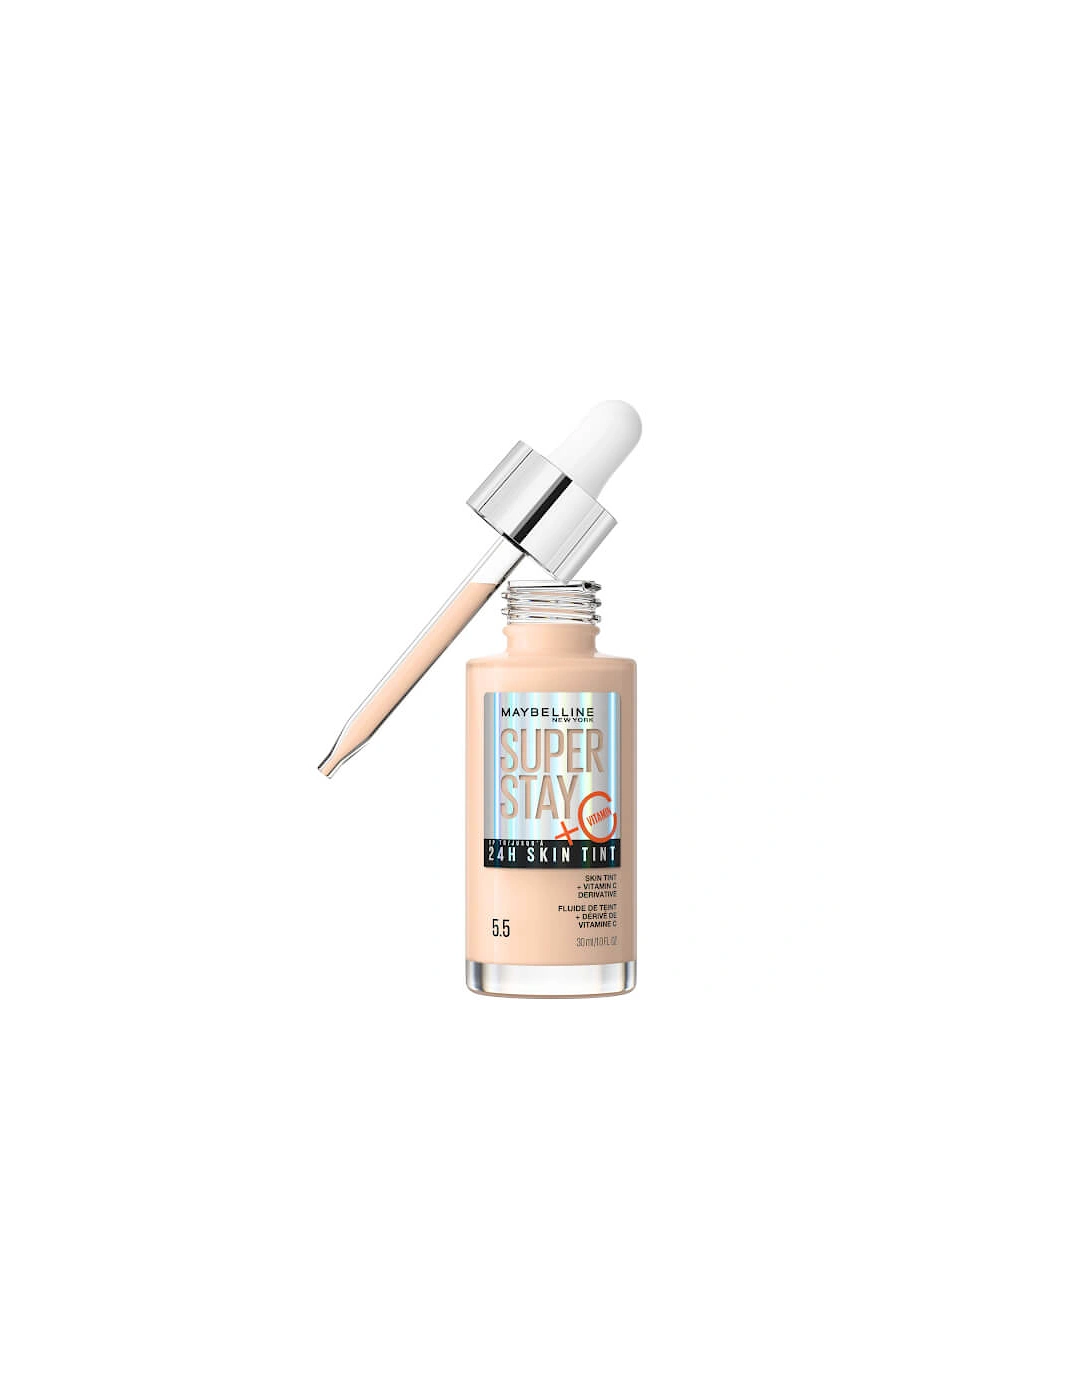 Super Stay up to 24H Skin Tint Foundation + Vitamin C - Shade 05.5, 2 of 1